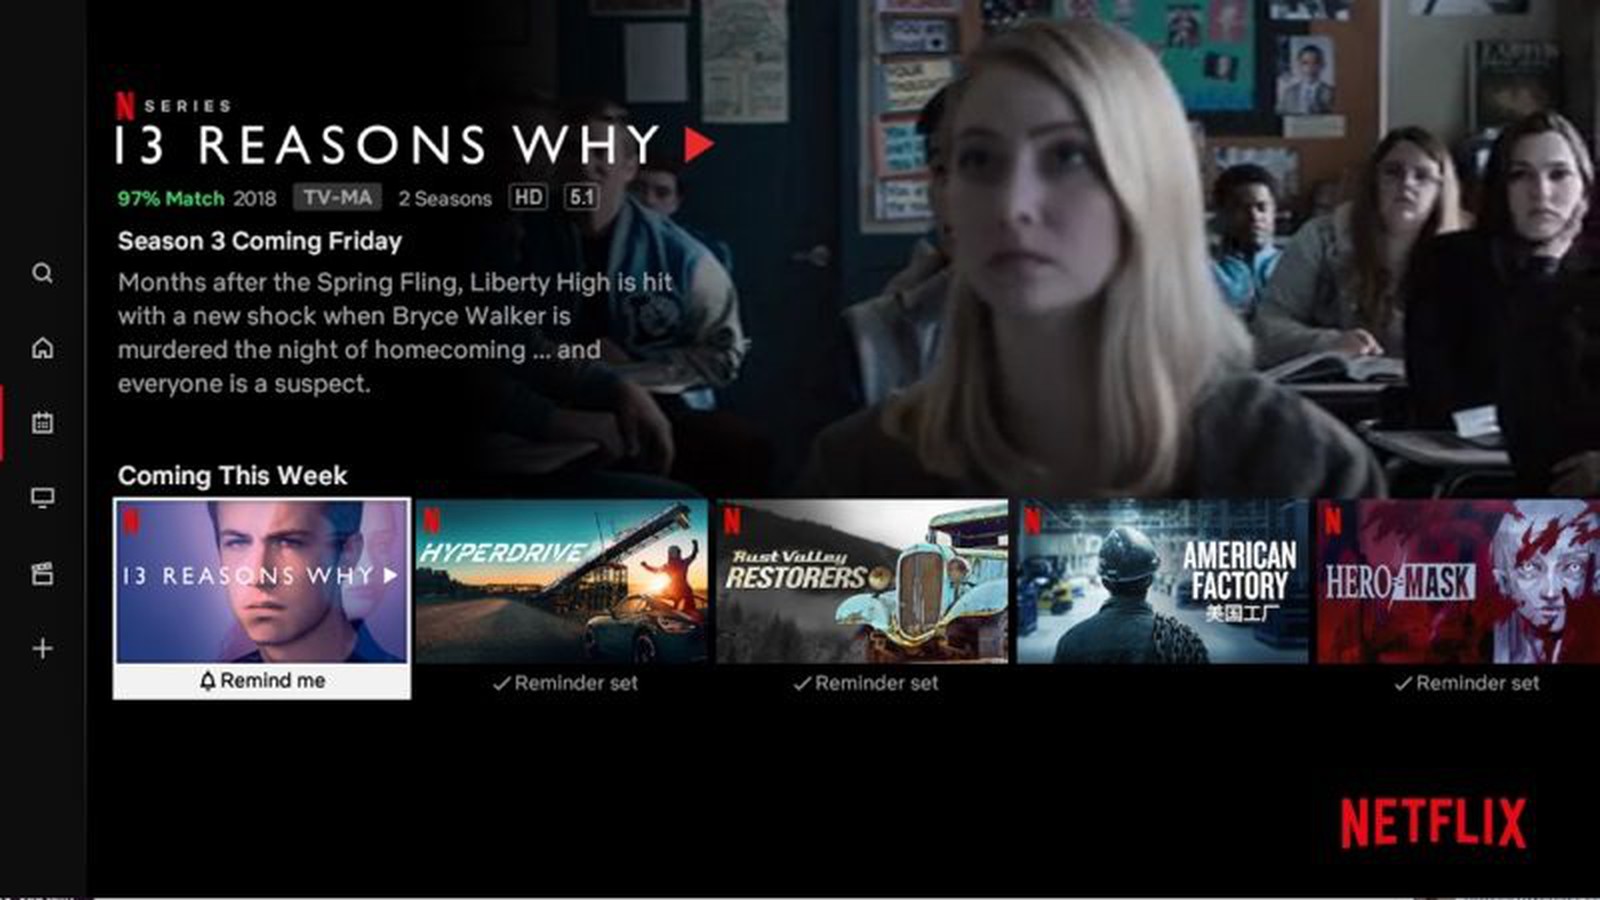 Netflix Adds 'Latest' Section to Show Everything That's New and Coming